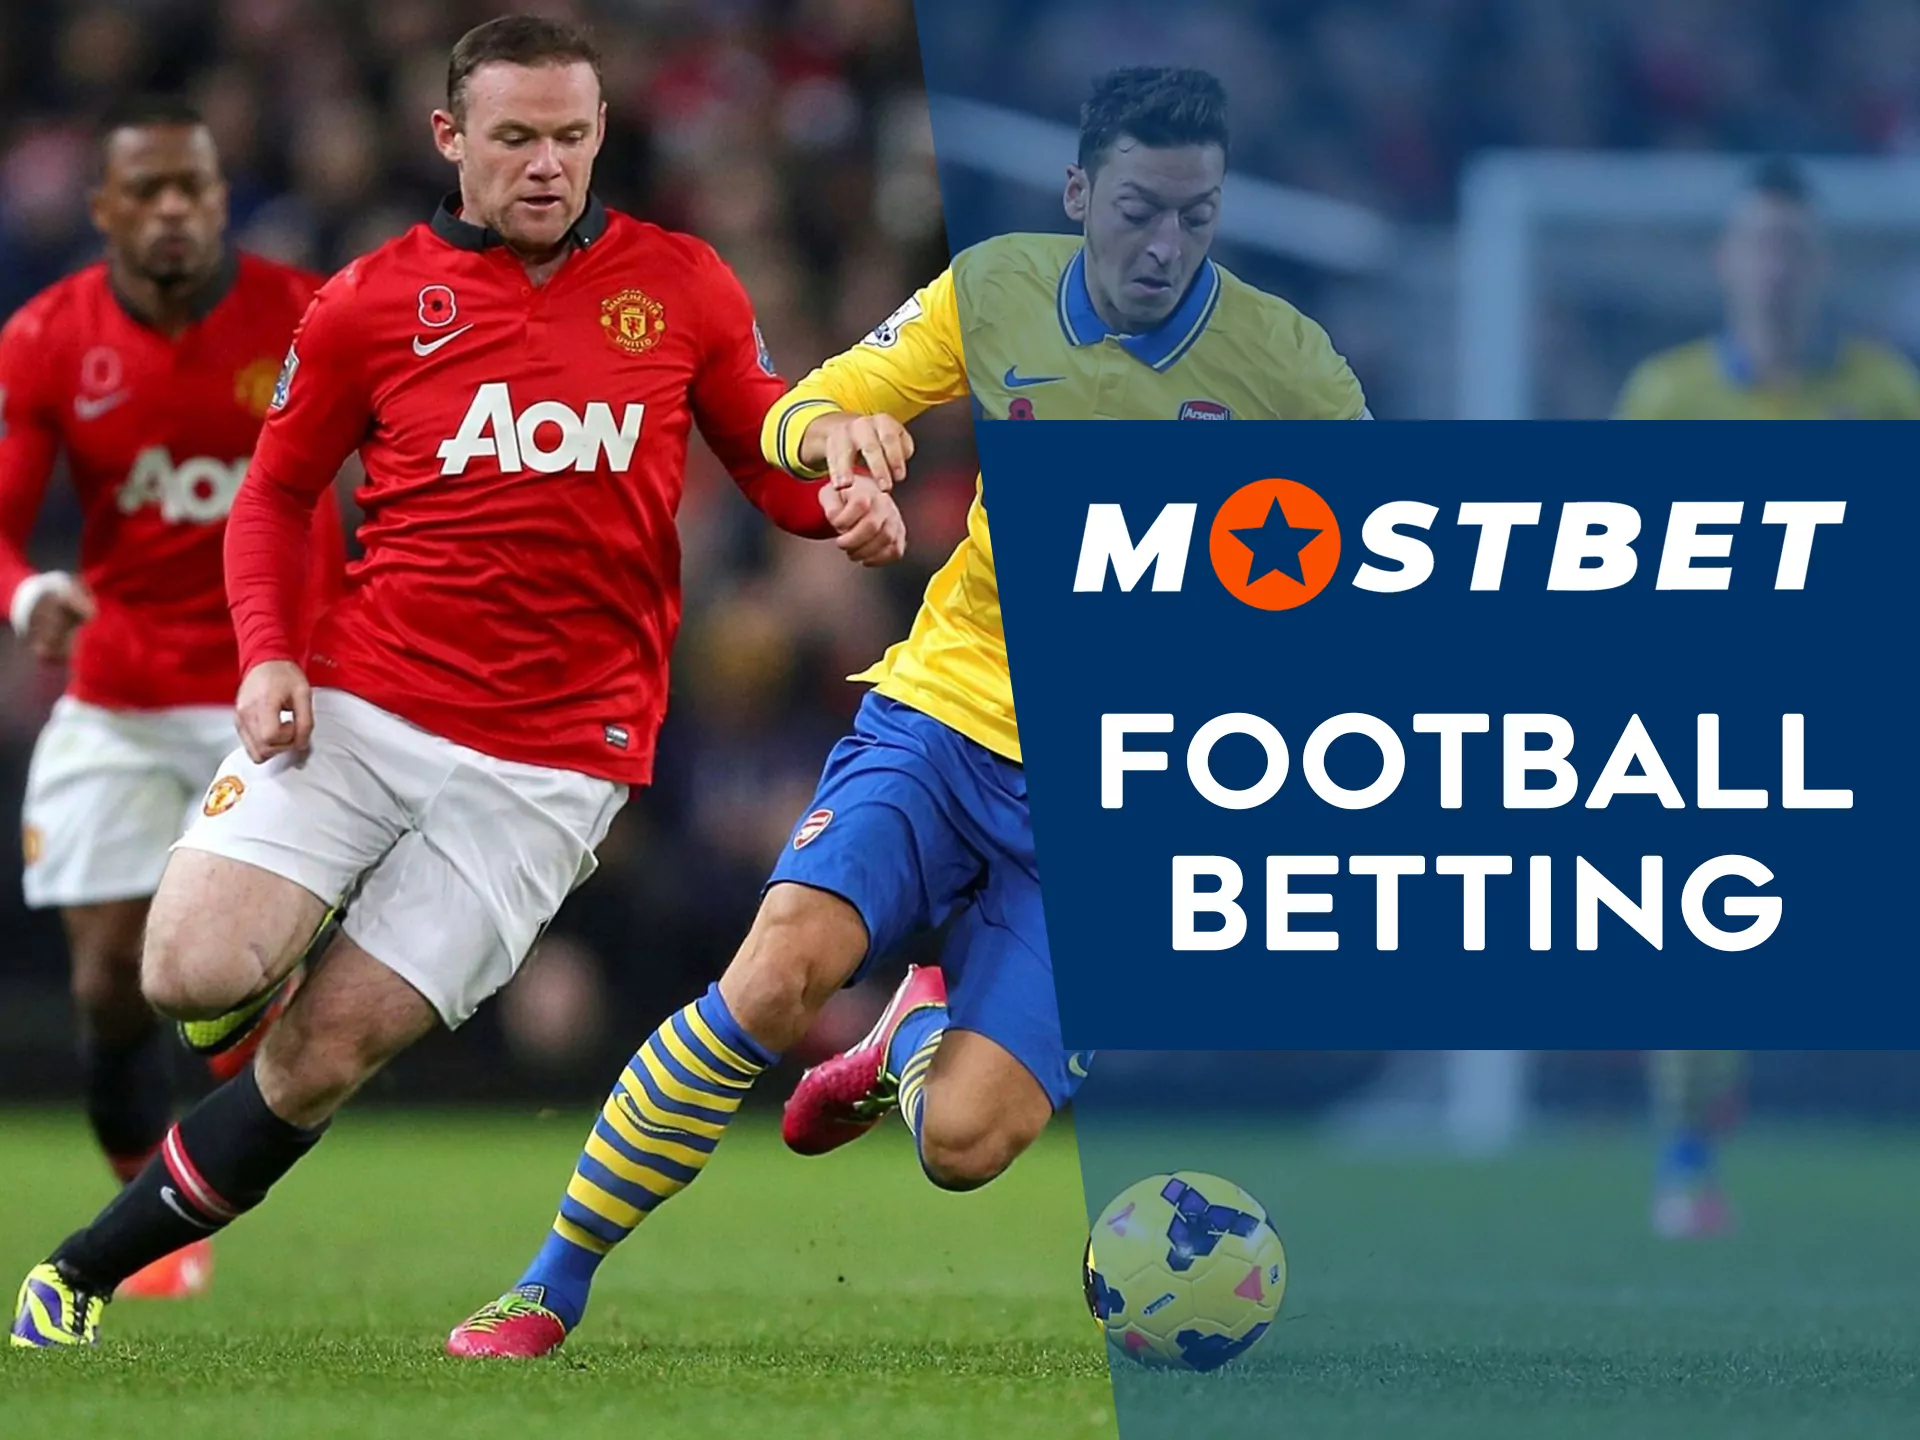 Mostbet football betting section is t